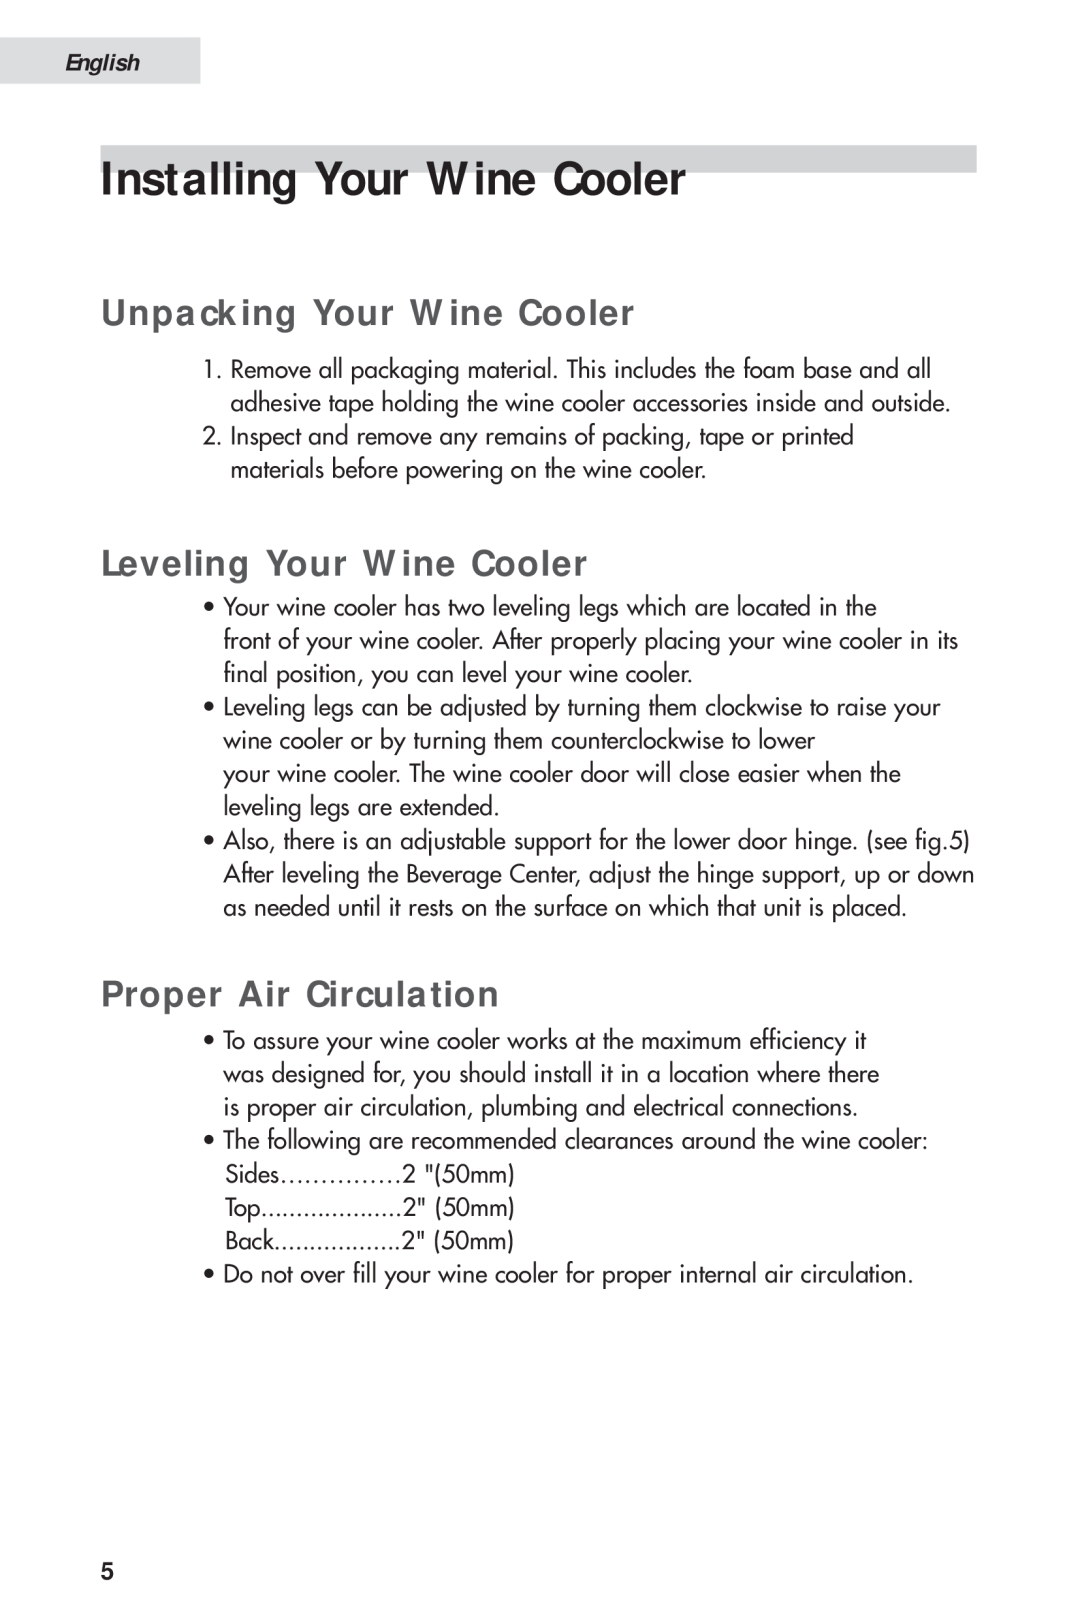 Haier HVH014A Installing Your Wine Cooler, Unpacking Your Wine Cooler, Leveling Your Wine Cooler, Proper Air Circulation 